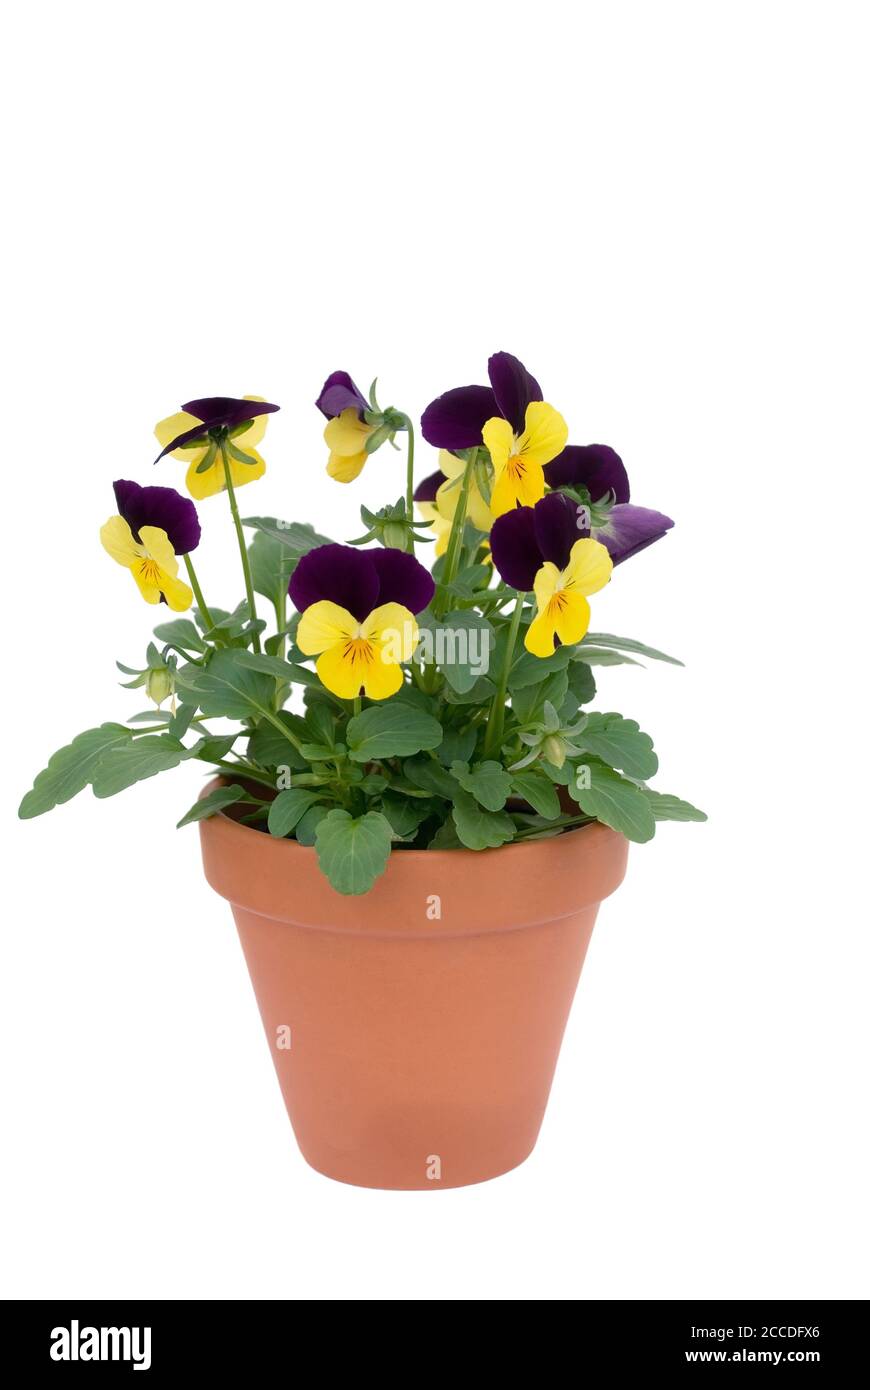 isolated pansies in flower pot against white background Stock Photo